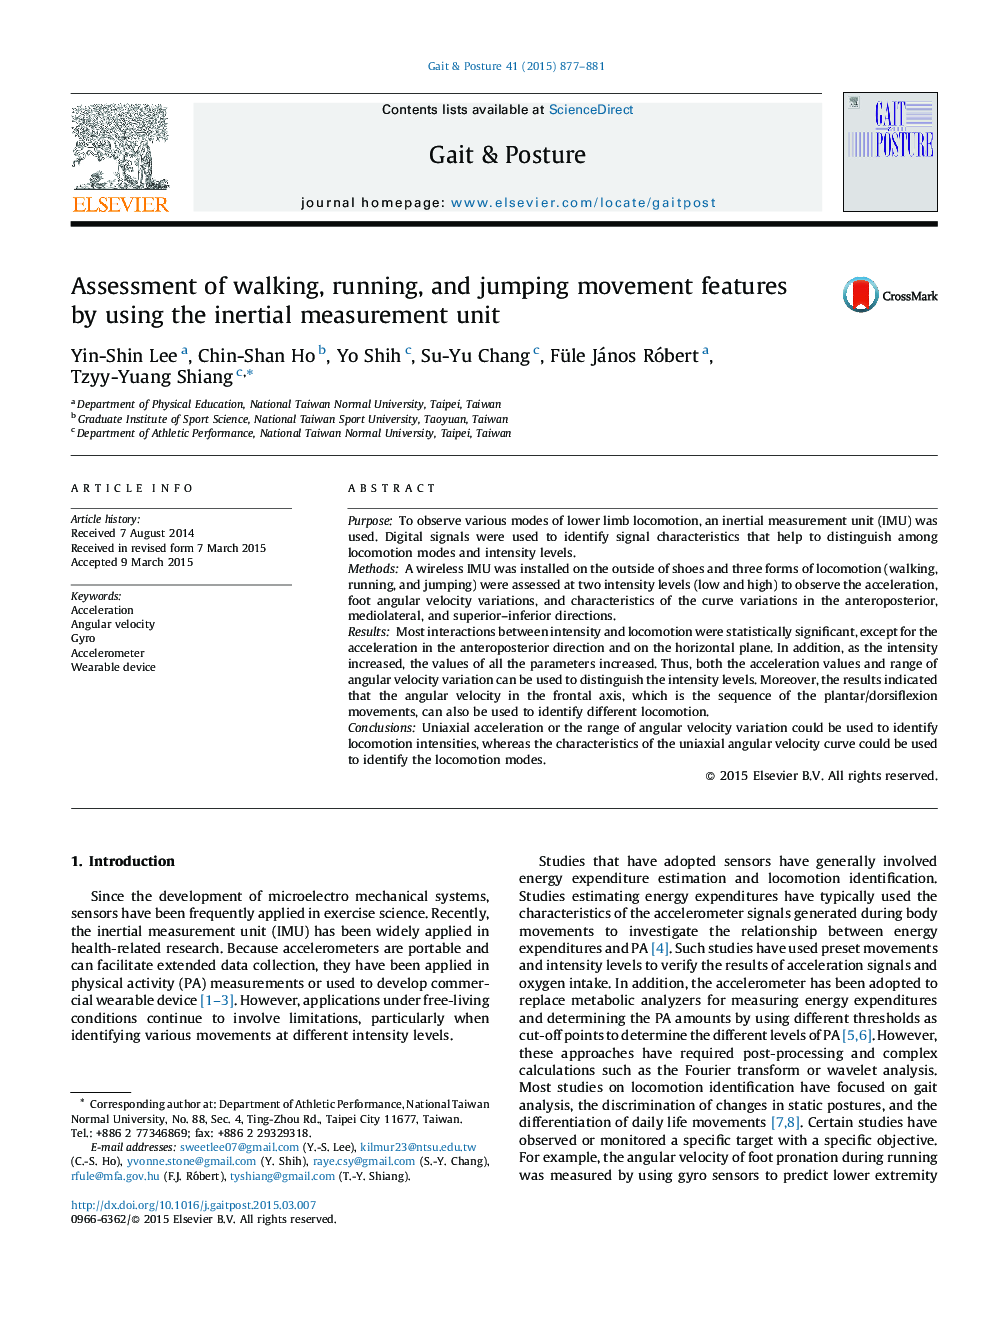 Assessment of walking, running, and jumping movement features by using the inertial measurement unit